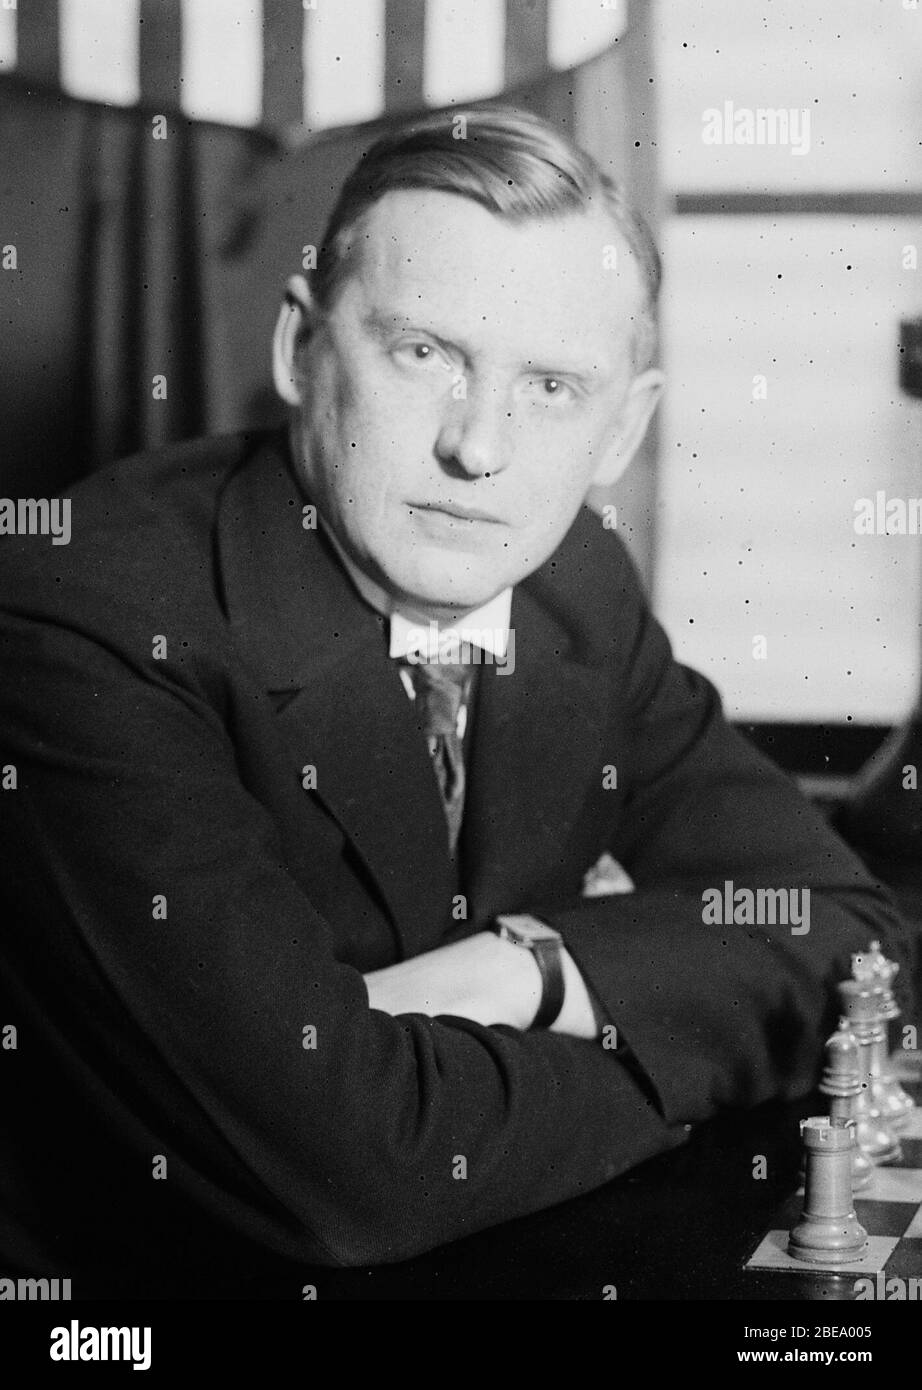 'English: Russian-born French chess champion Alexander Alekhine (1892-1946); Unrecorded [possibly 1924]; This image  is available from the United States Library of Congress's Prints and Photographs division under the digital ID ggbain.36943.This tag does not indicate the copyright status of the attached work. A normal copyright tag is still required. See Commons:Licensing for more information.   العربية | беларуская (тарашкевіца) | čeština | Deutsch | English | español | فارسی | suomi | français | עברית | magyar | italiano | lietuvių | македонски | മലയാളം | Nederlands | polski | português | p Stock Photo